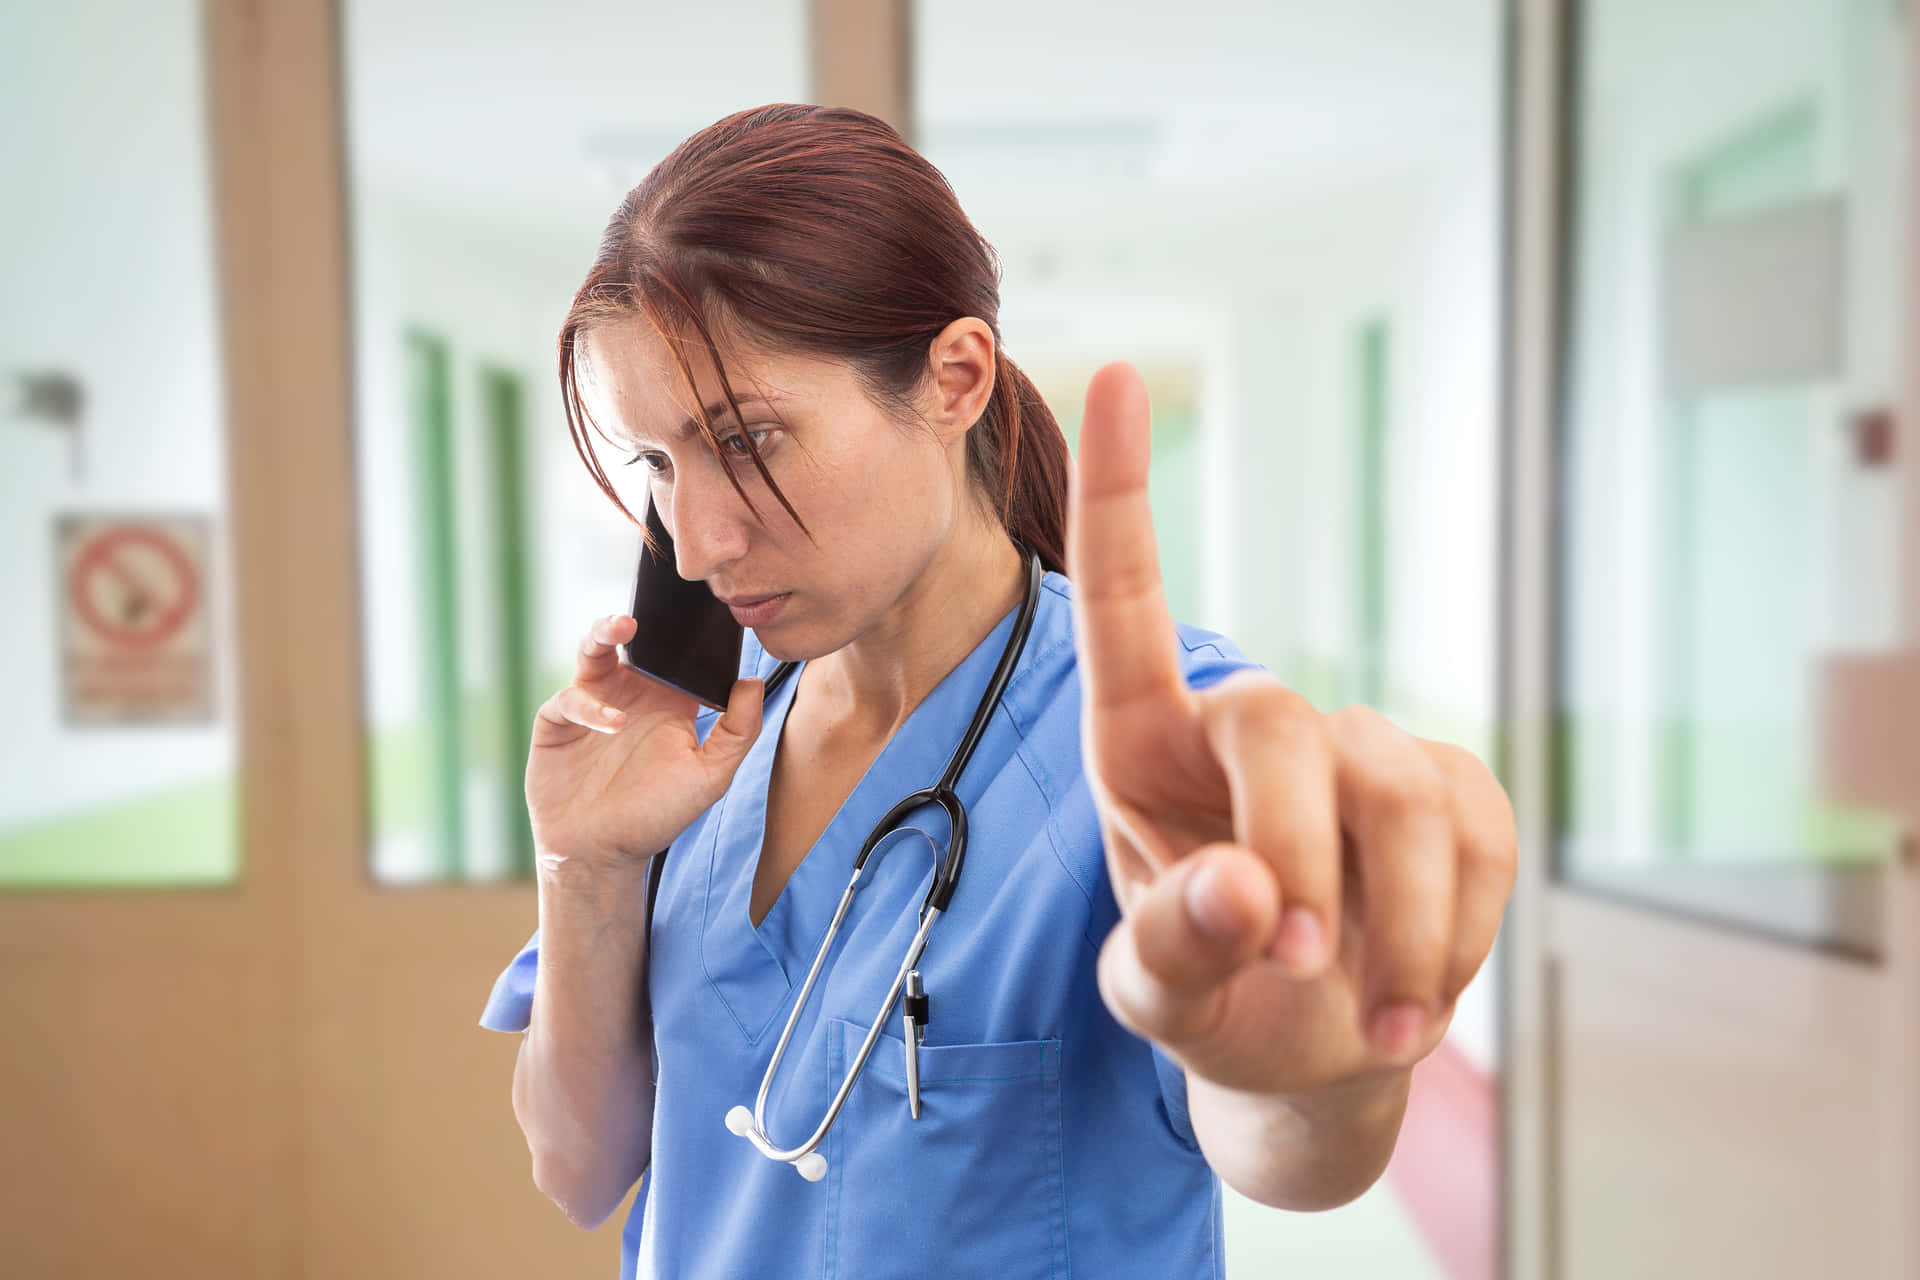 A Nurse Is Talking On The Phone While Pointing At Something